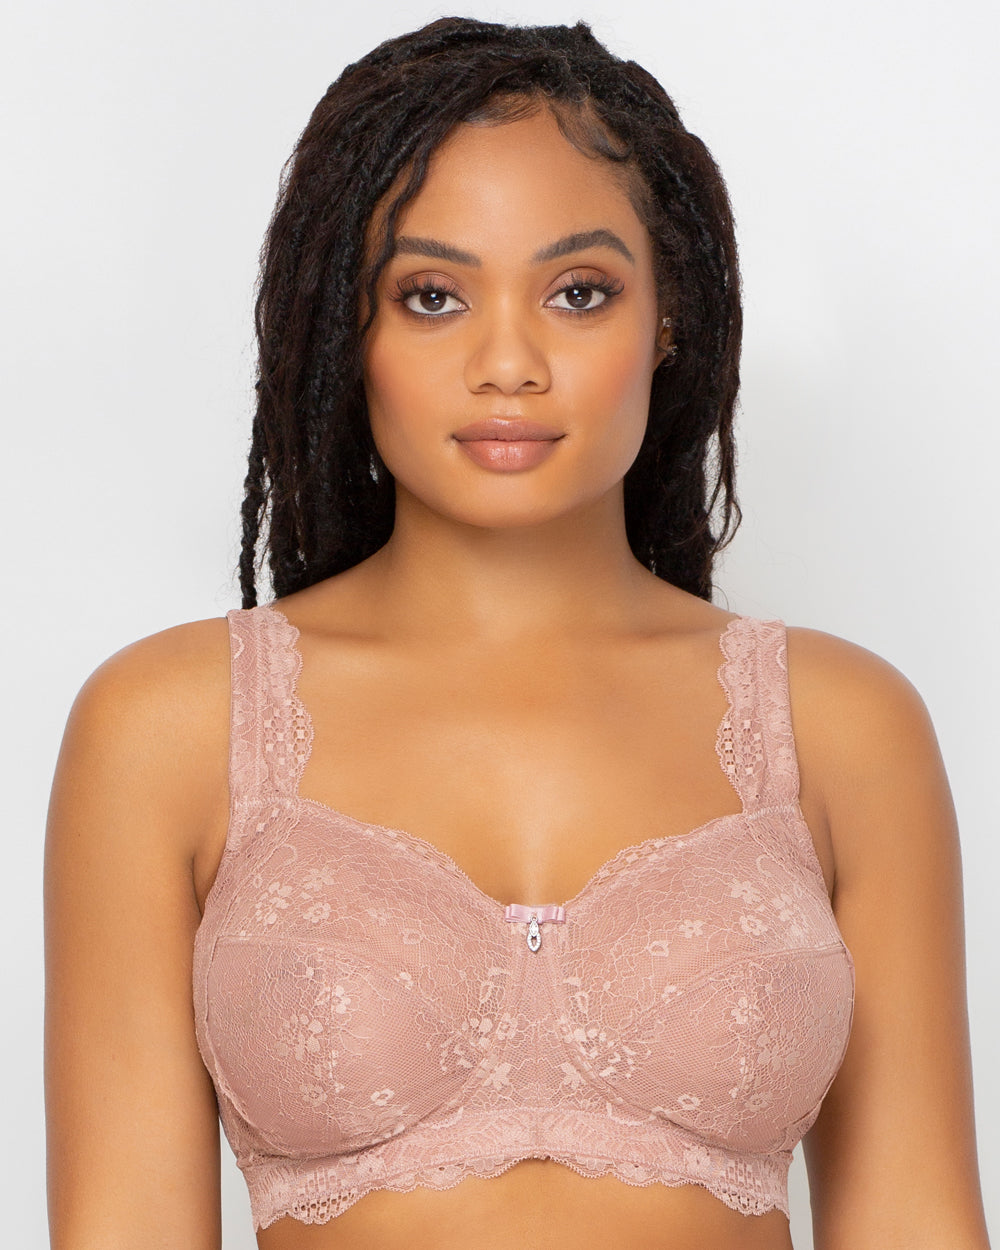  Womens Plus Size Soft Cotton Lace Bra Full Coverage Wirefree  Non-Padded 42DDD